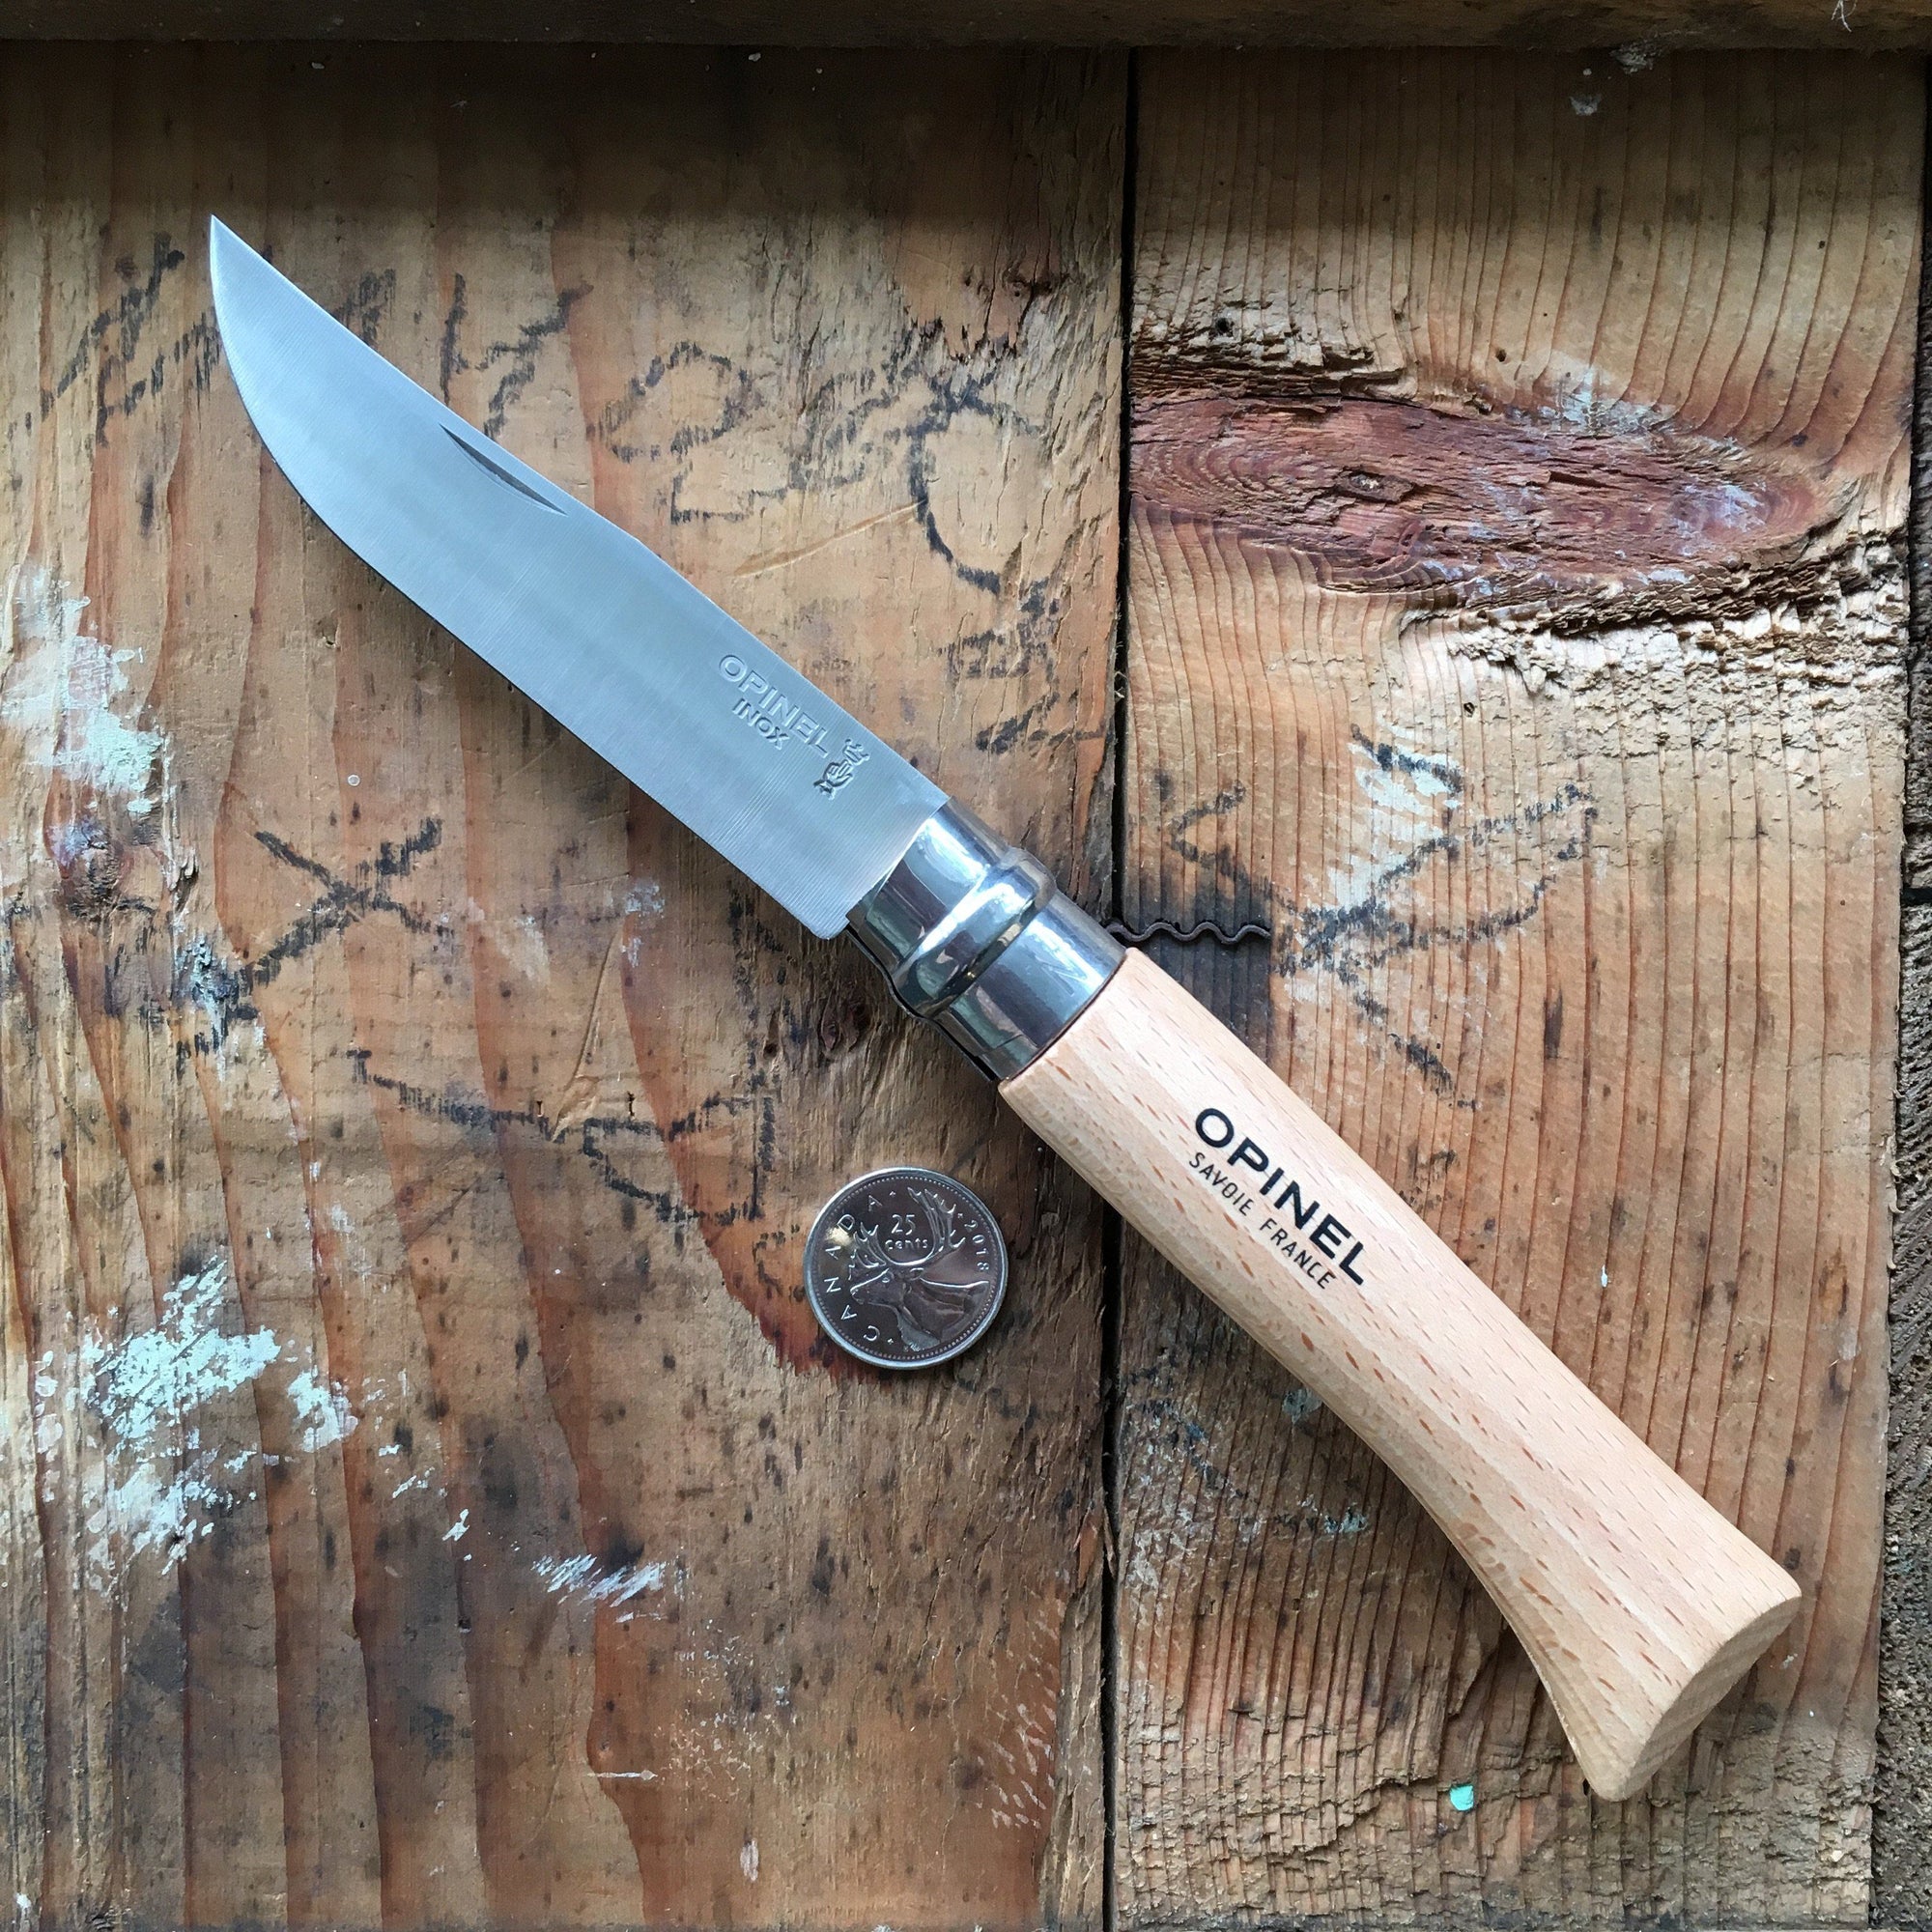 Opinel Inox No.09 Folding Knife from Opinel